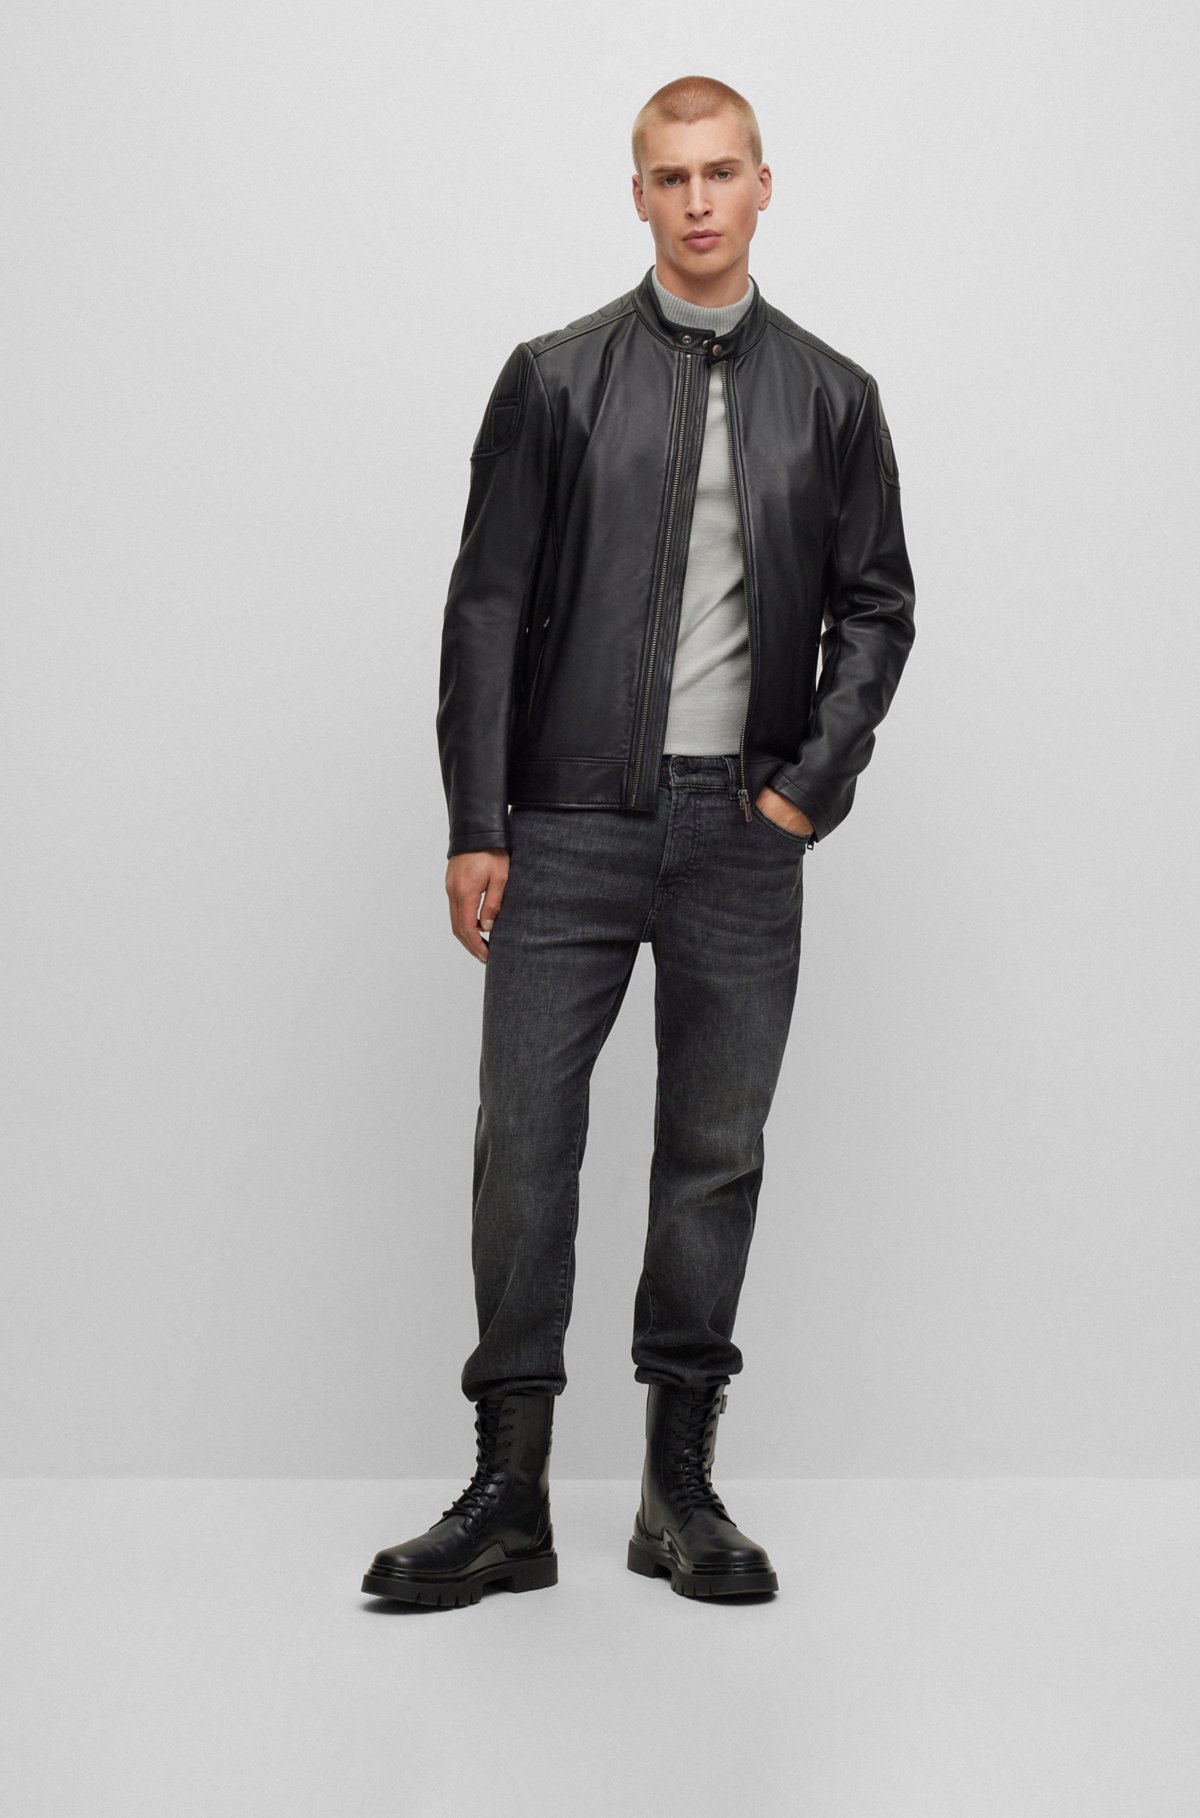 BOSS - Slim-fit biker jacket in leather with padding